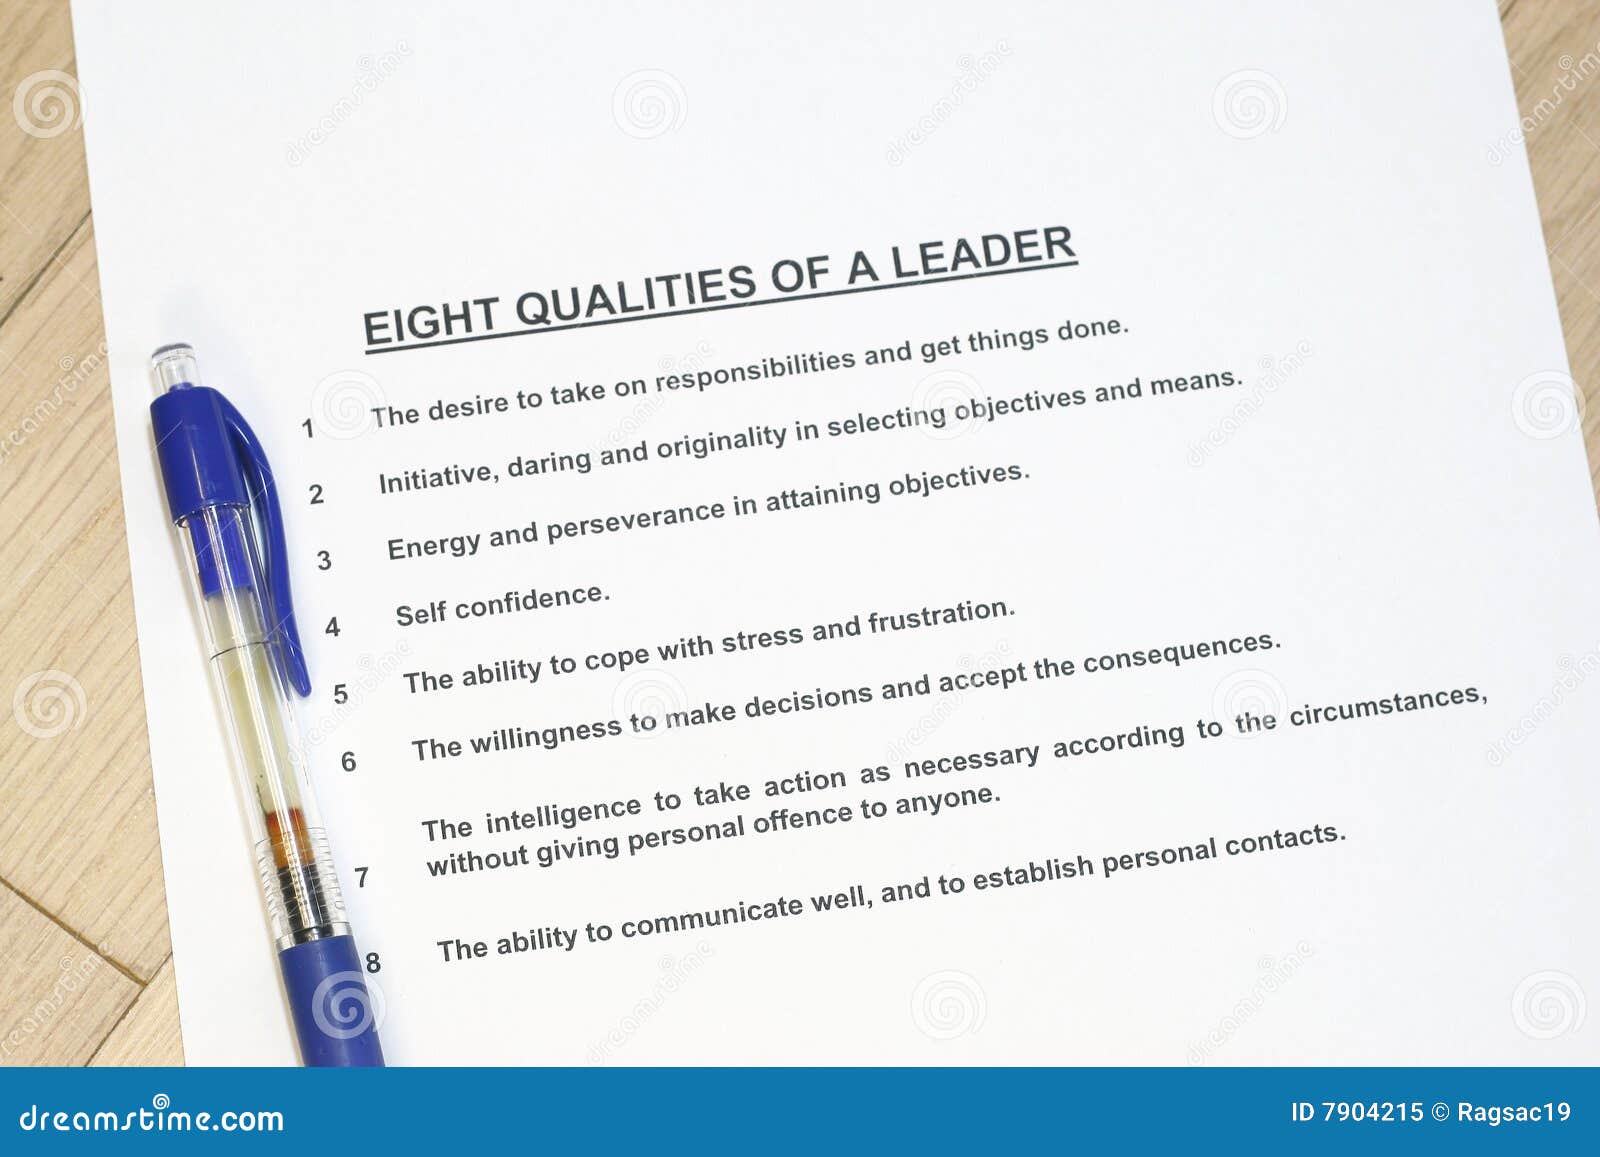 eight qualities of a leader